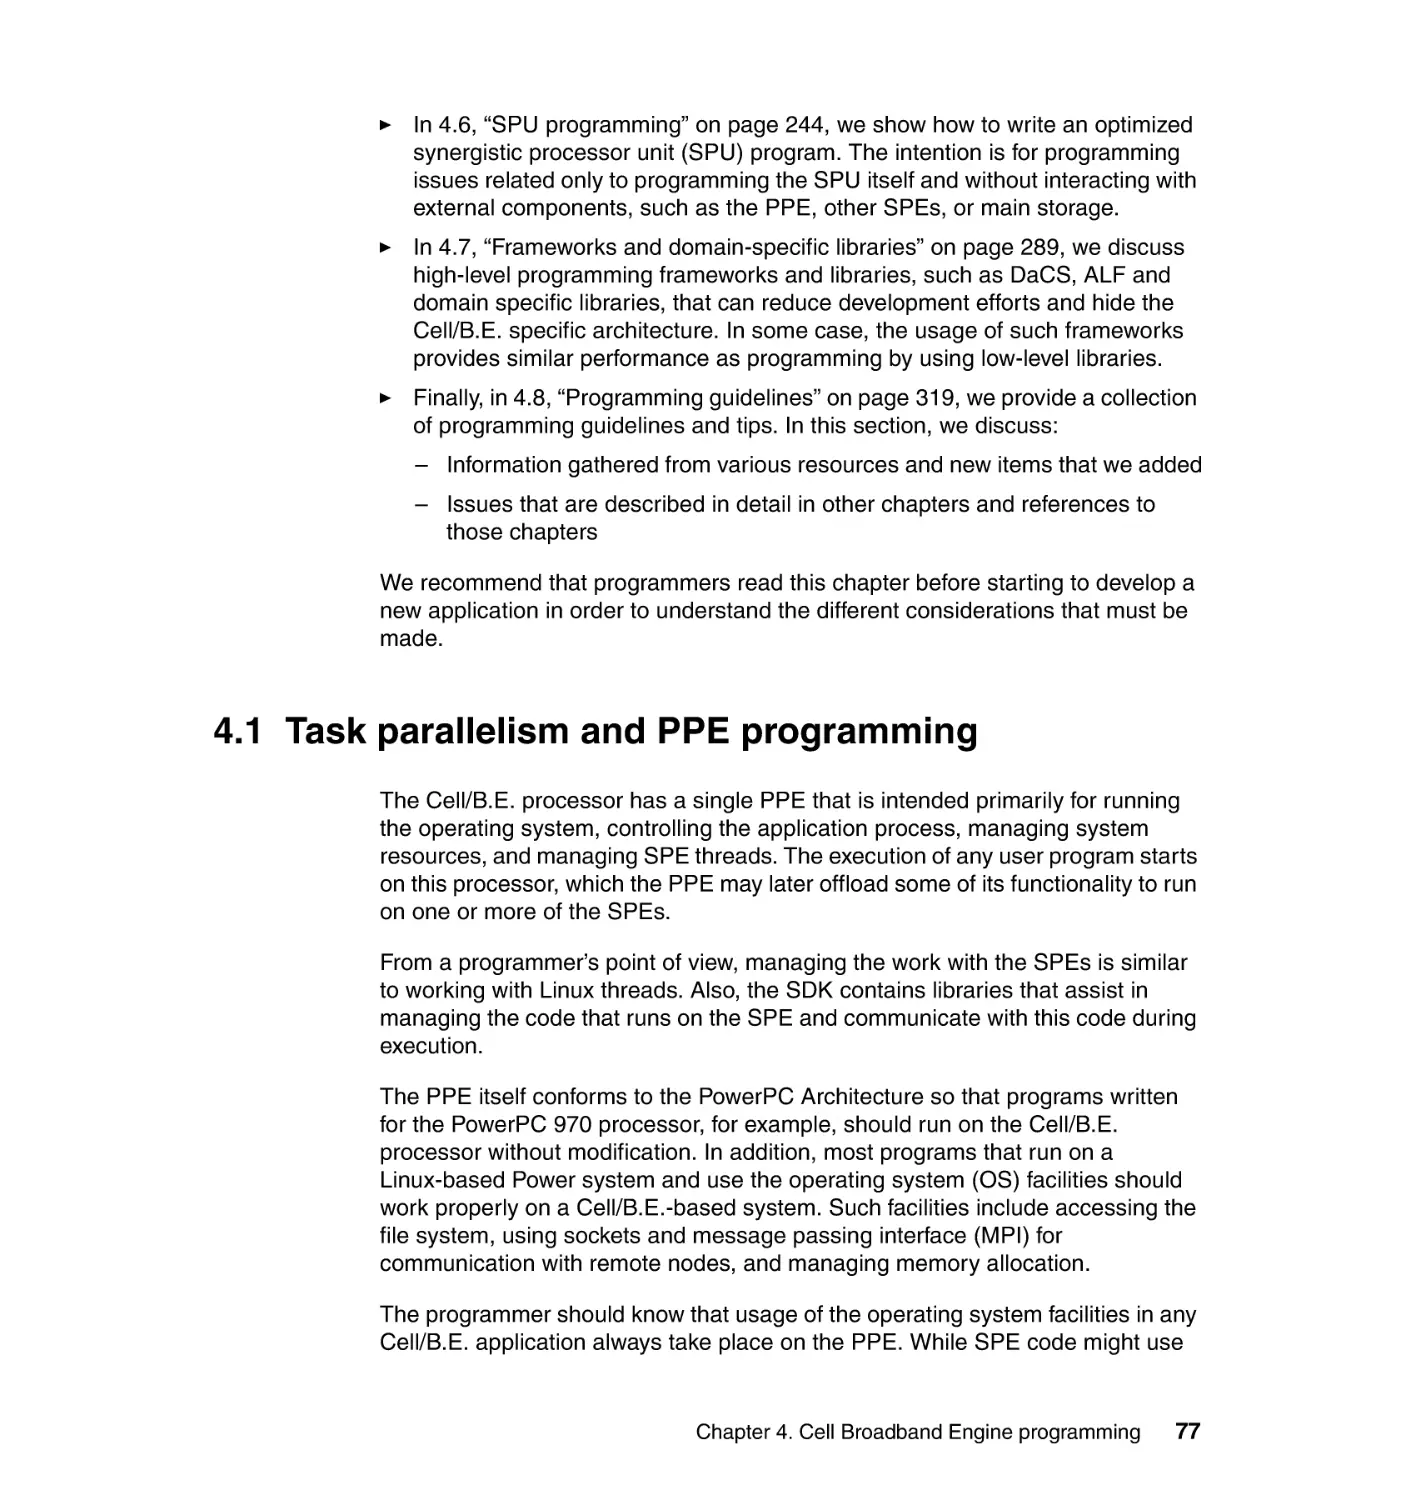 4.1 Task parallelism and PPE programming